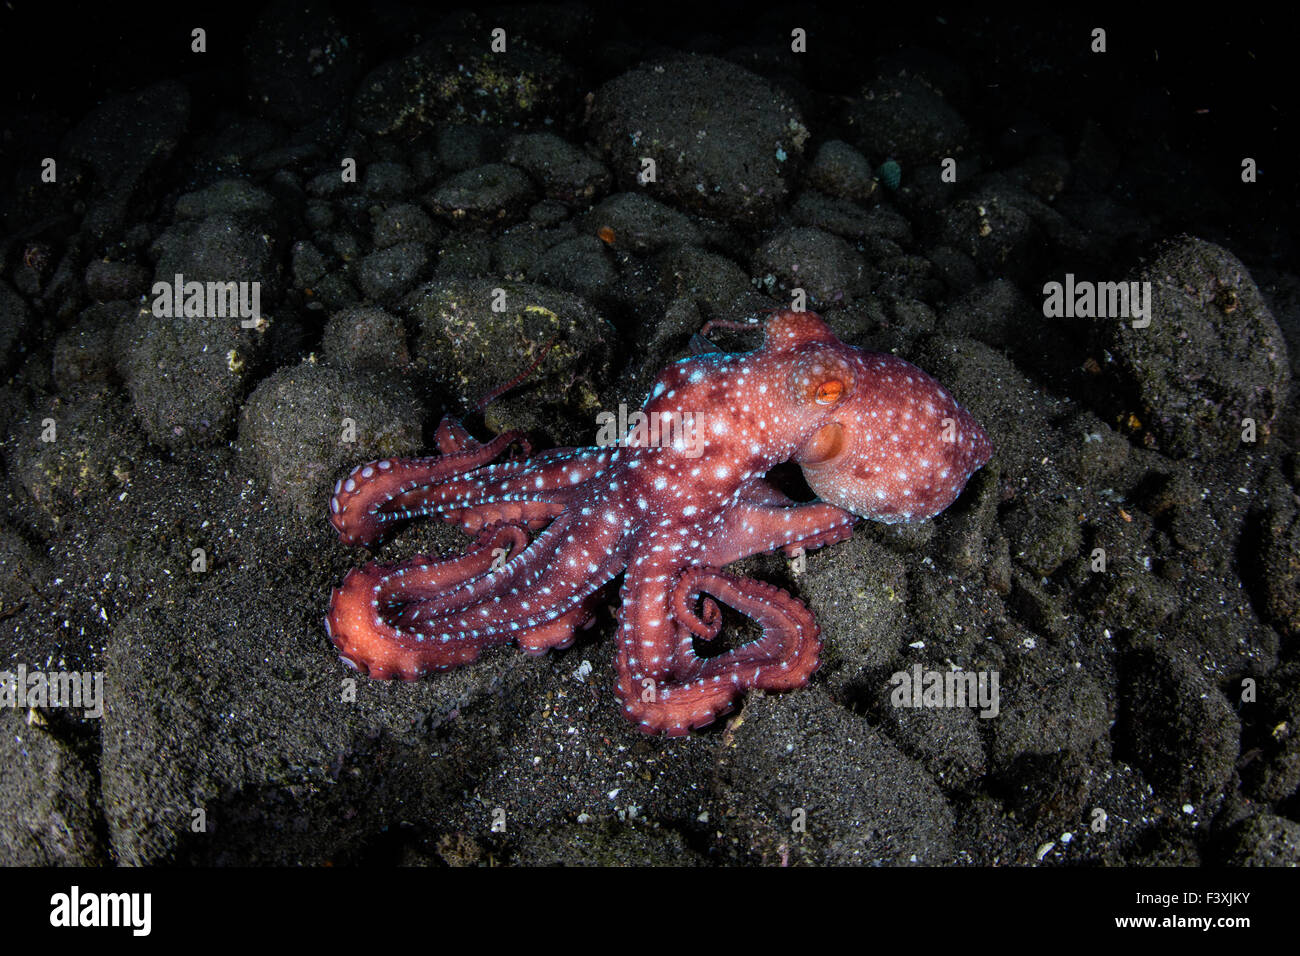 A Starry Night octopus (Octopus luteus) hunts for prey at night on a rocky reef in Komodo National Park, Indonesia. Stock Photo